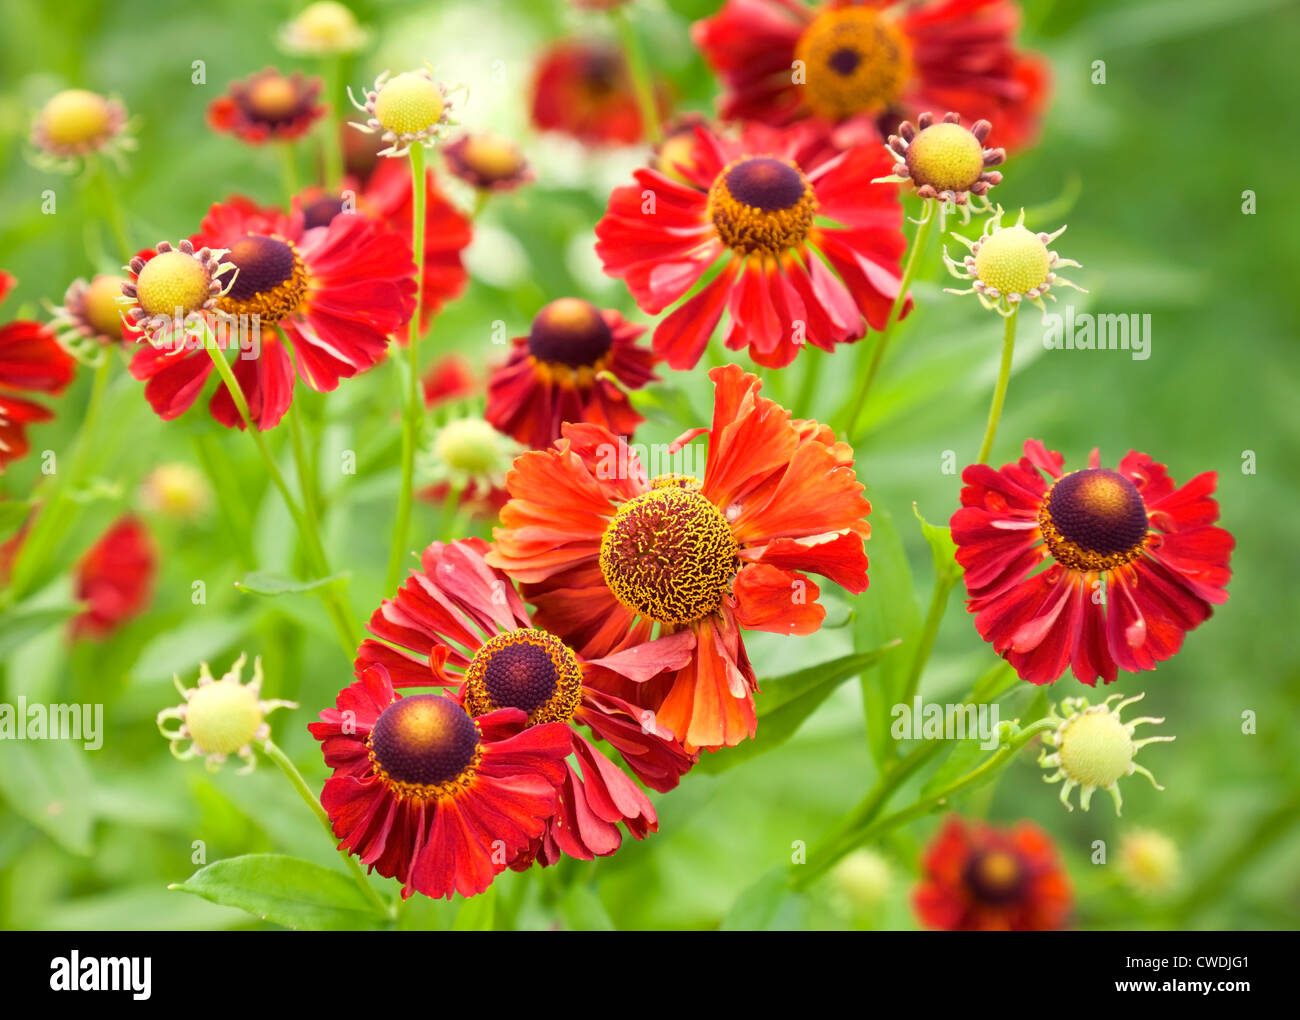 Bright red helenium flowers in the garden Stock Photo